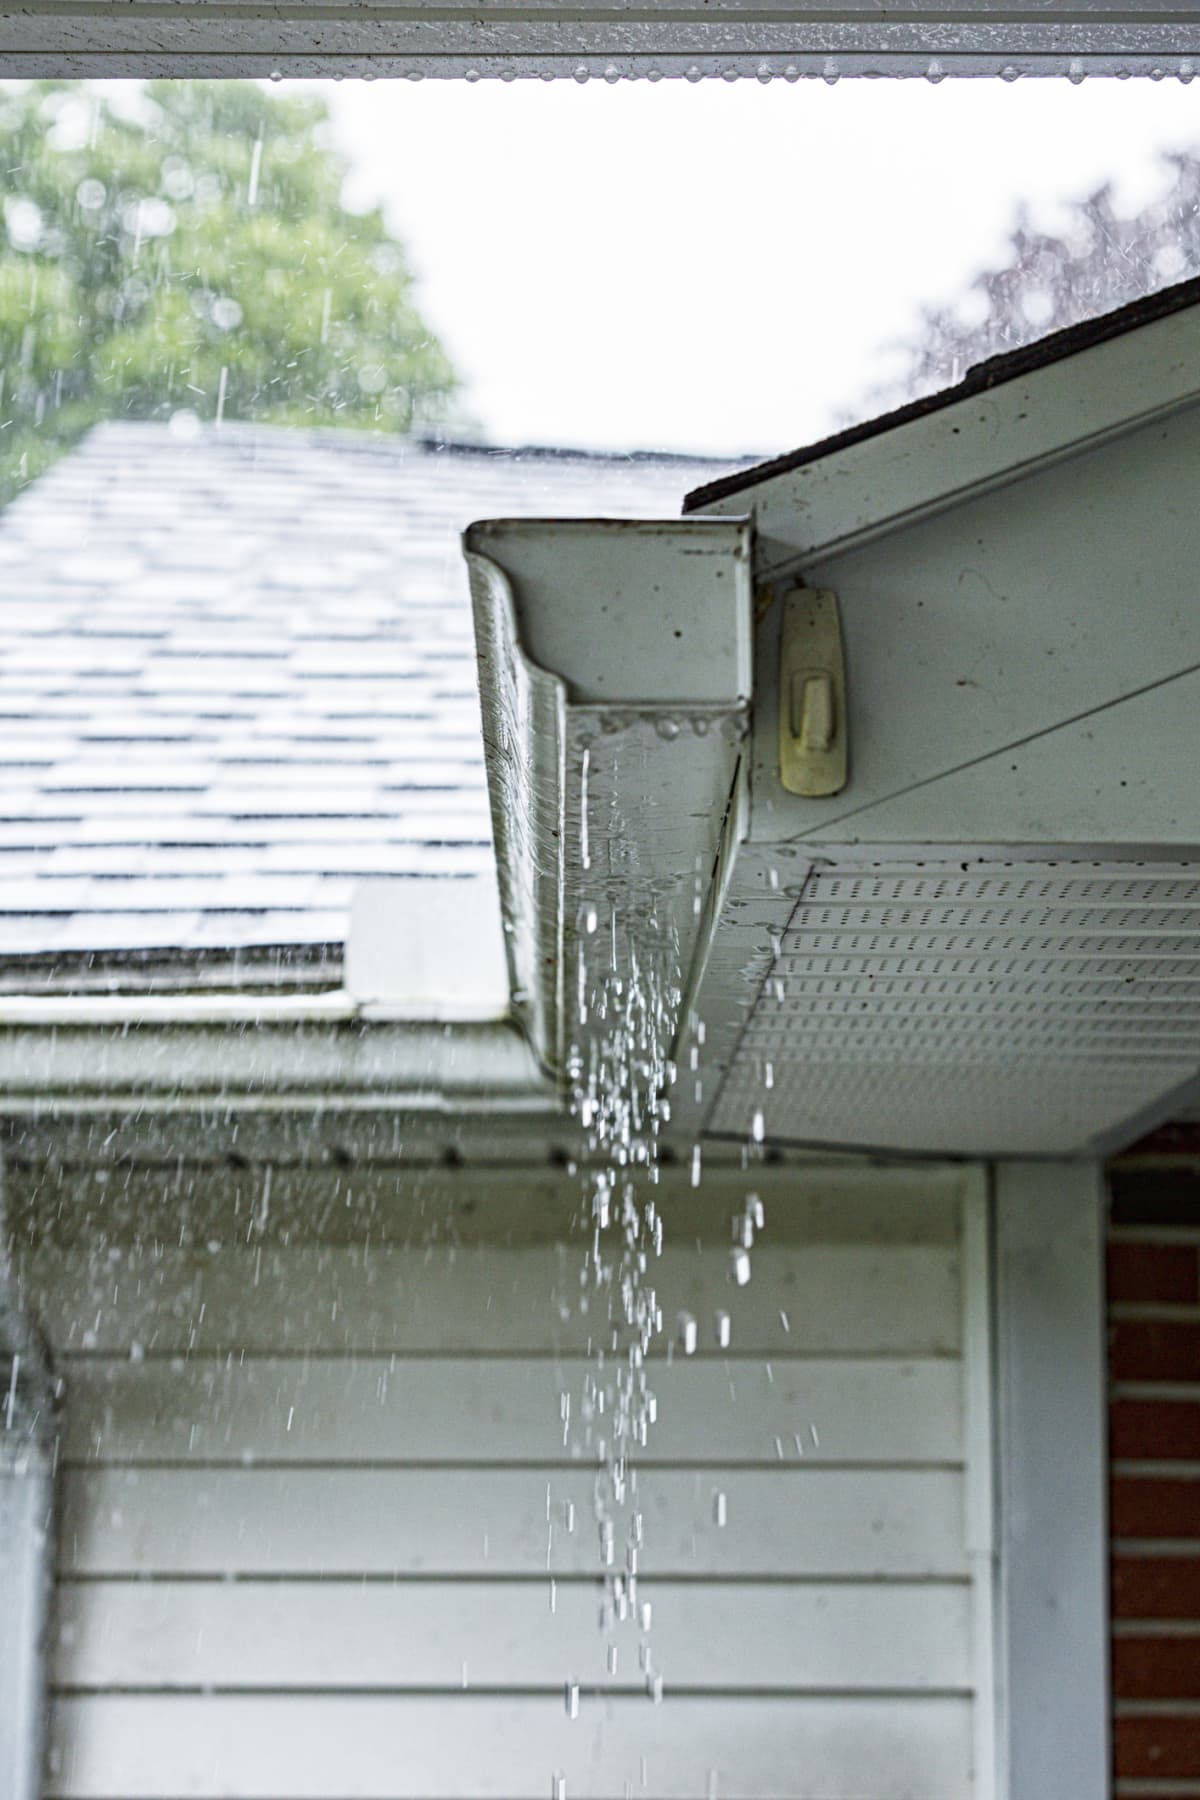 Rainwater overflowing aluminum gutters on a suburban residential colonial style house near Rochester, New York